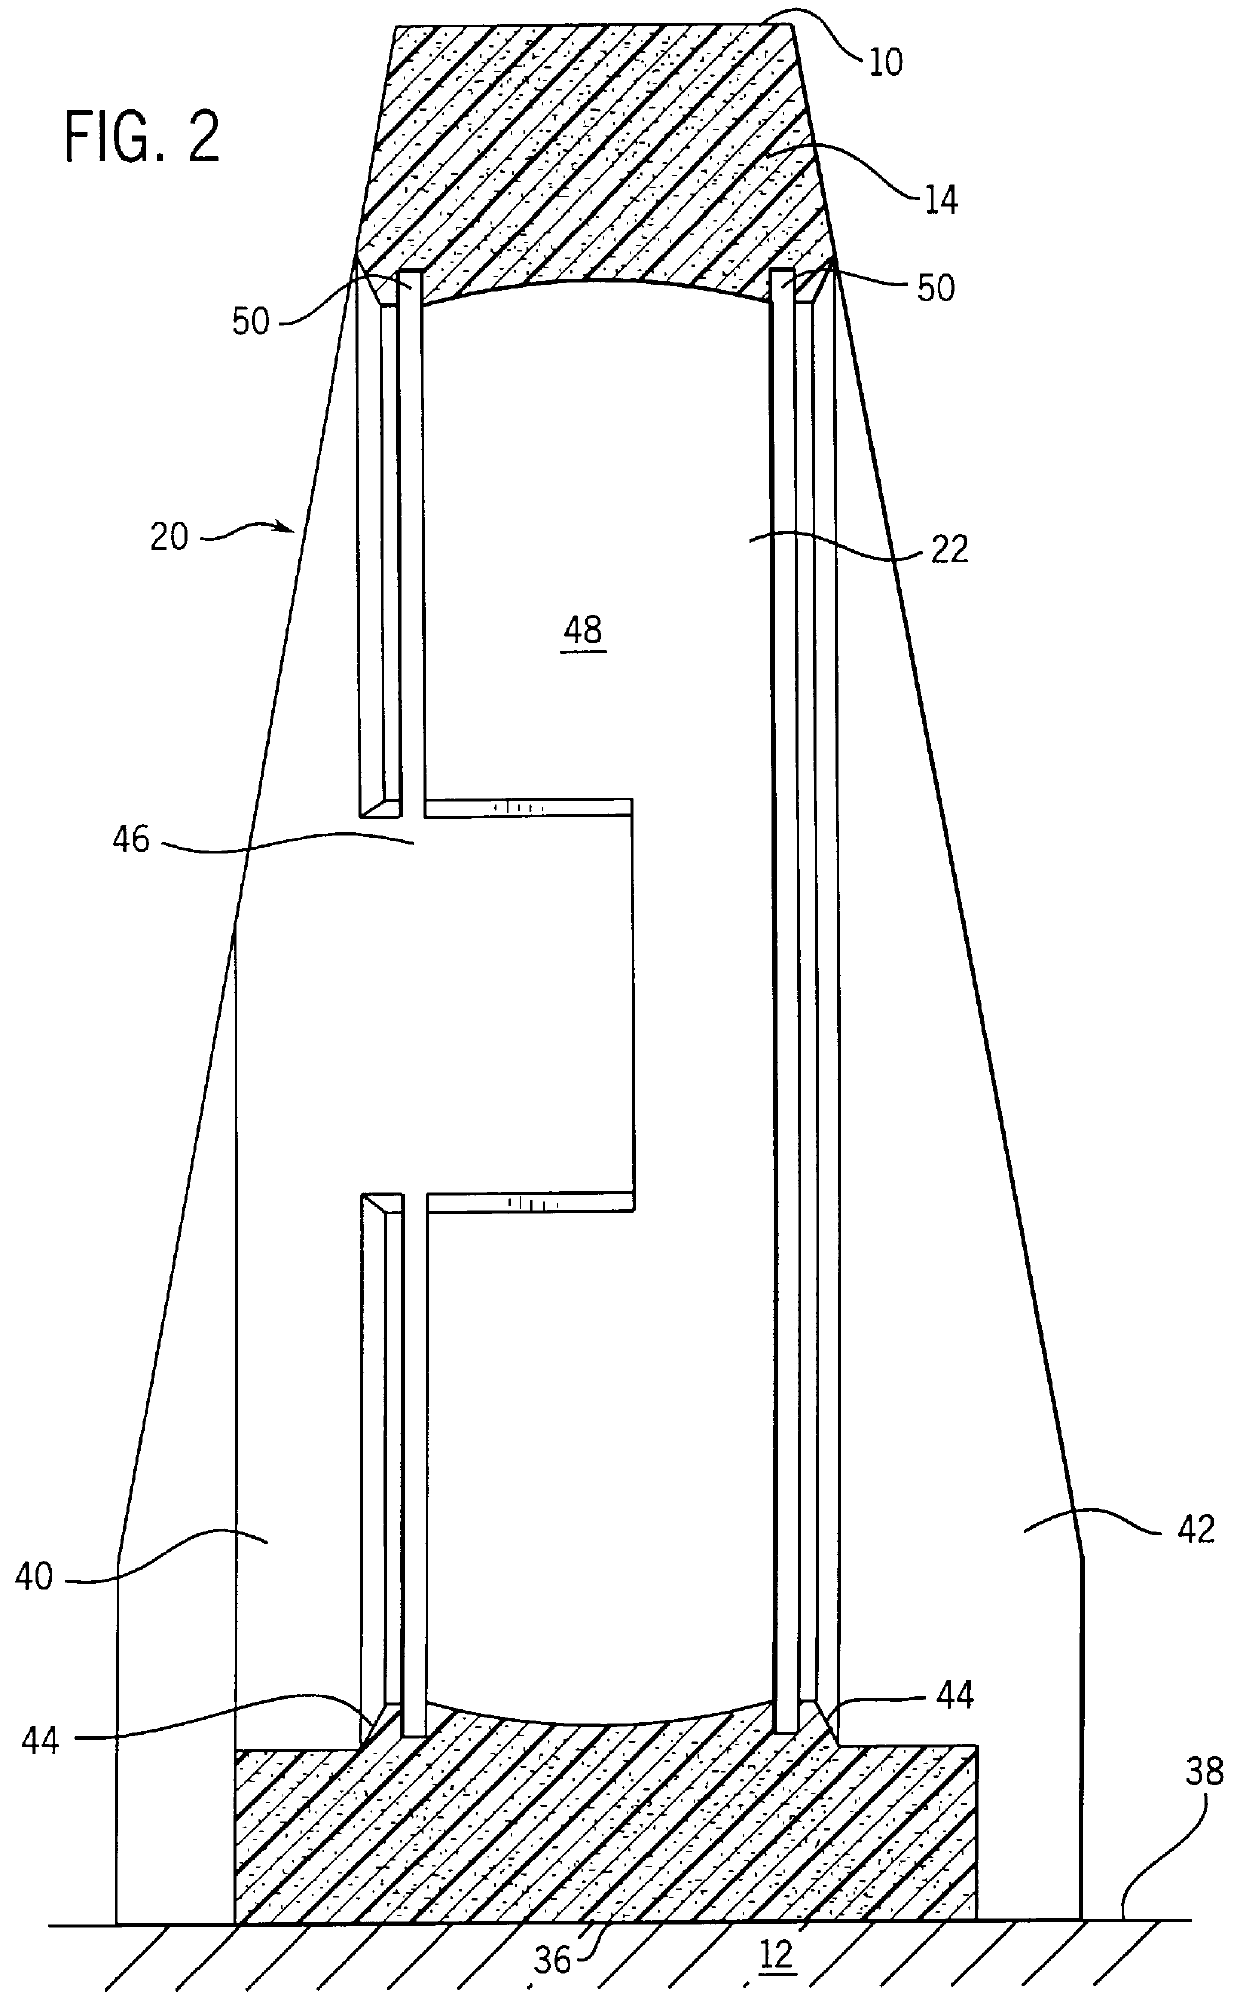 Molded polymeric bearing housing and method for making same